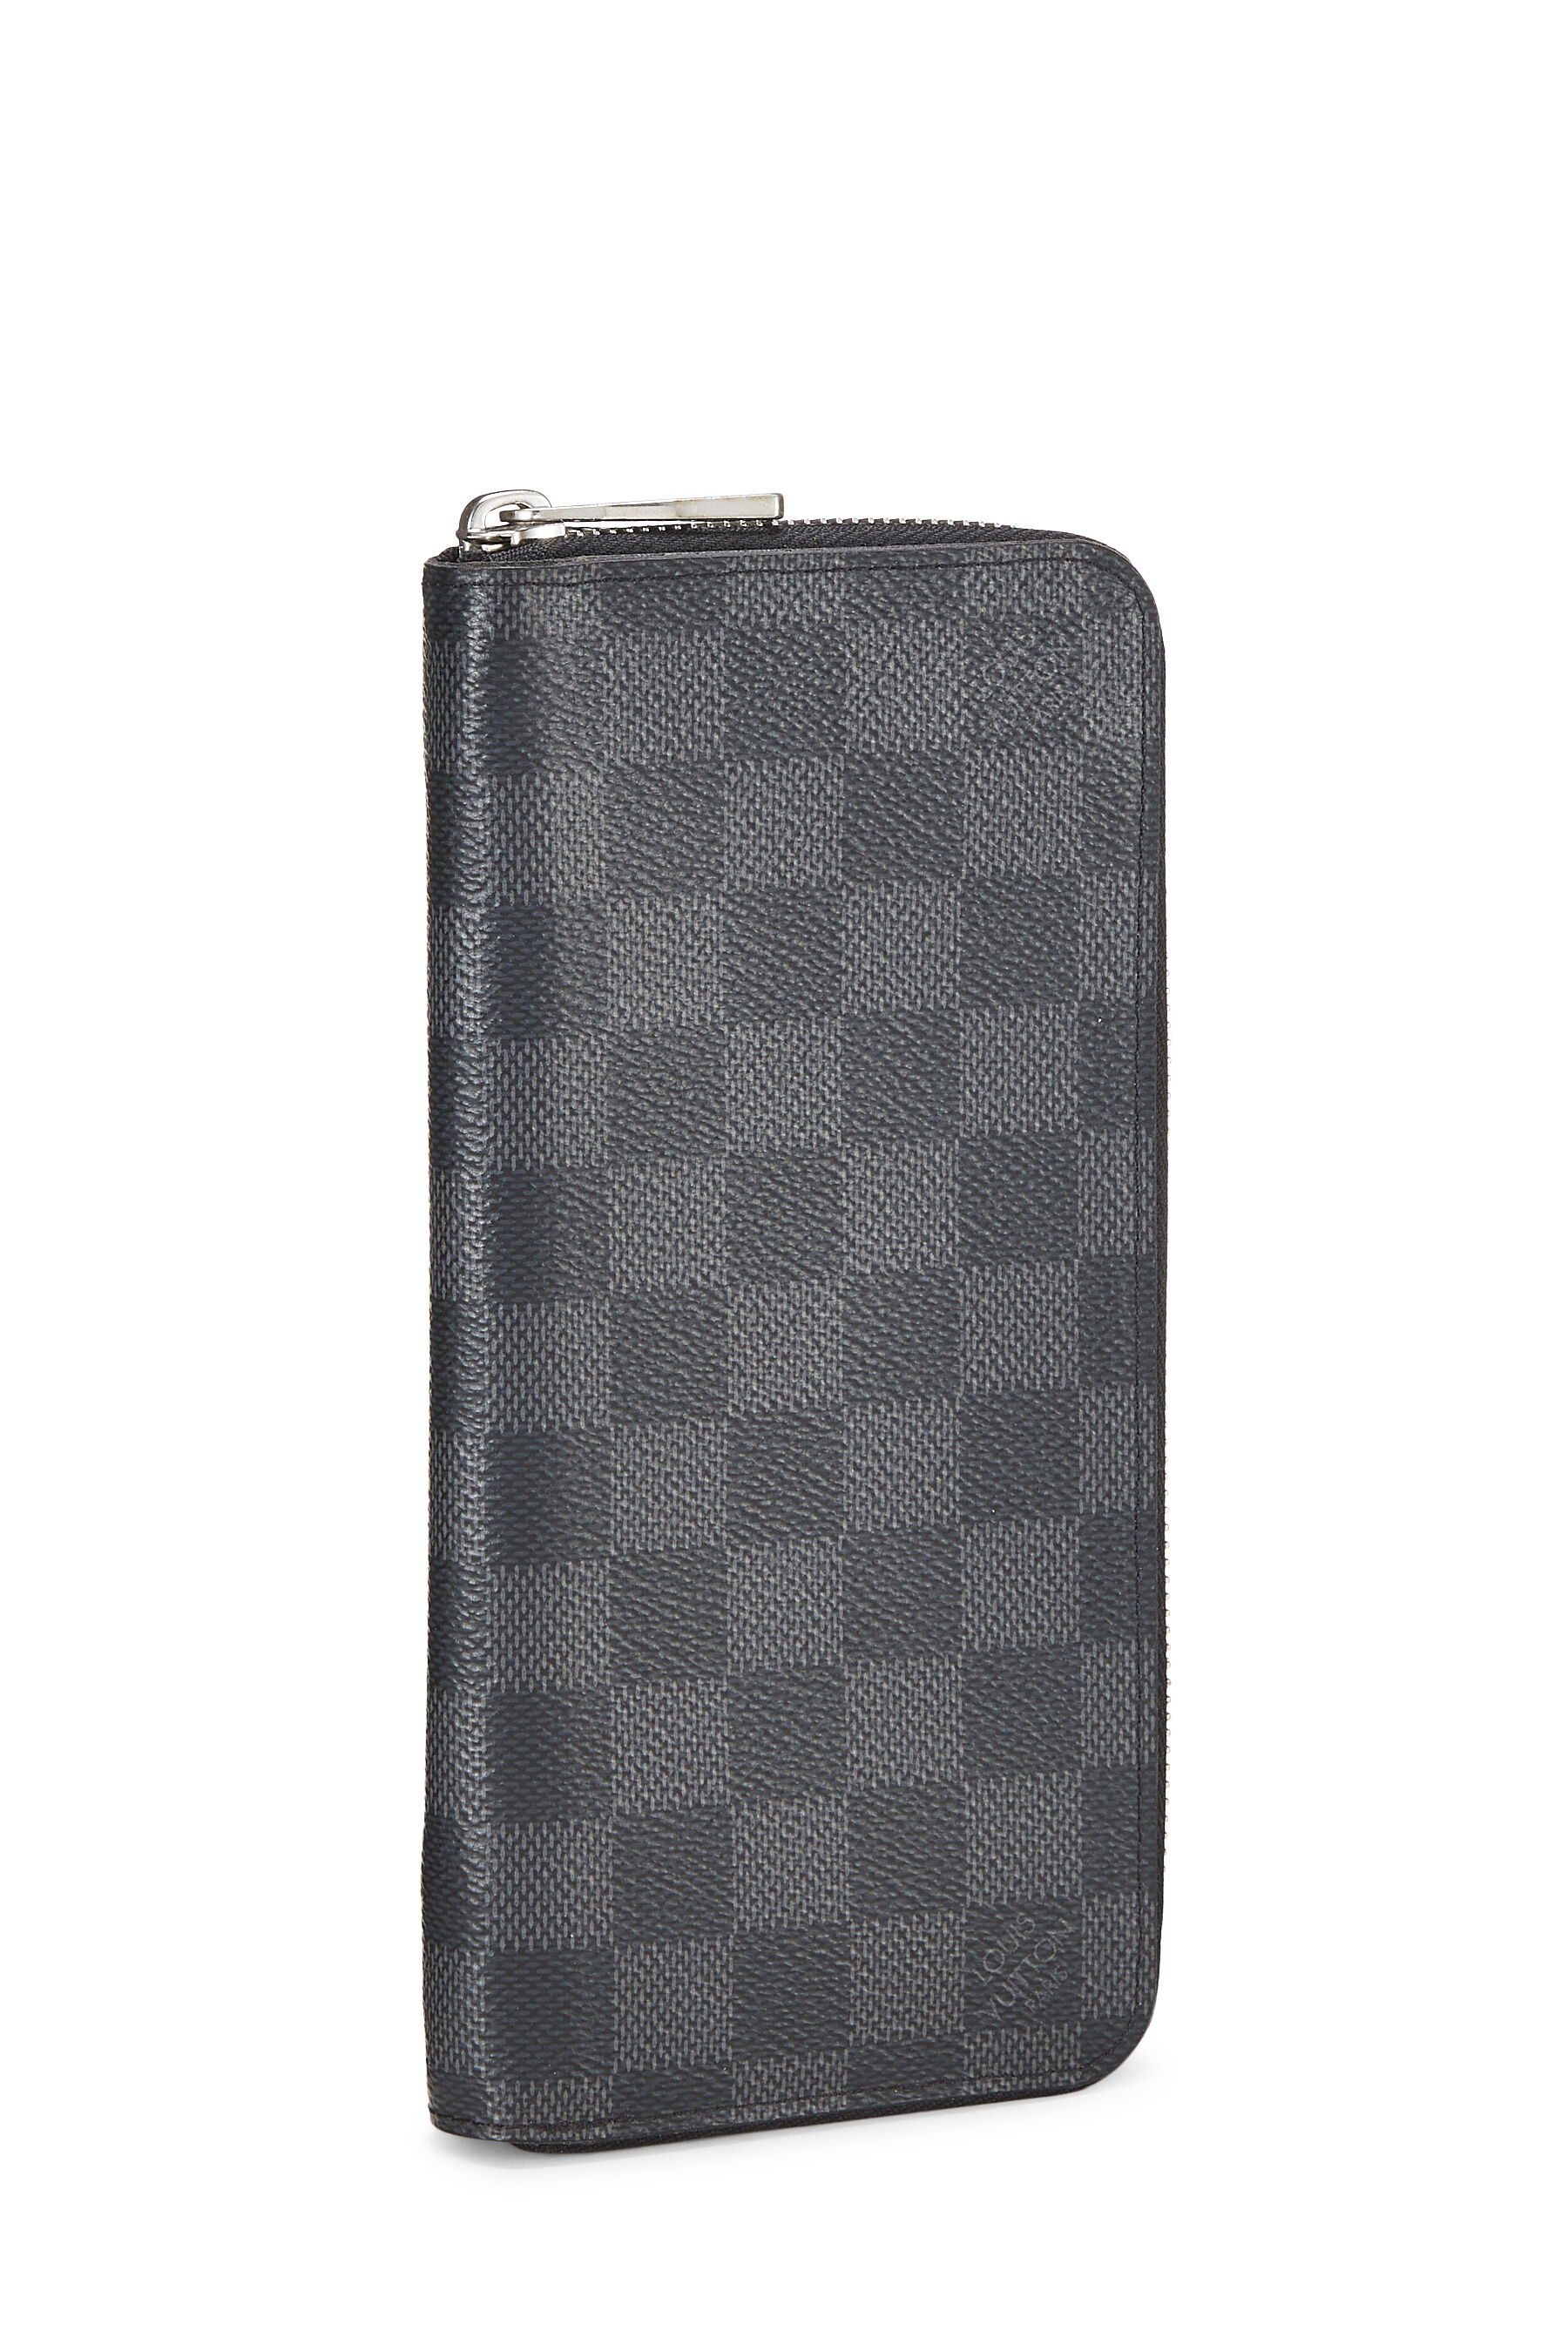 Zippy Organizer Damier Graphite Canvas - Wallets and Small Leather Goods